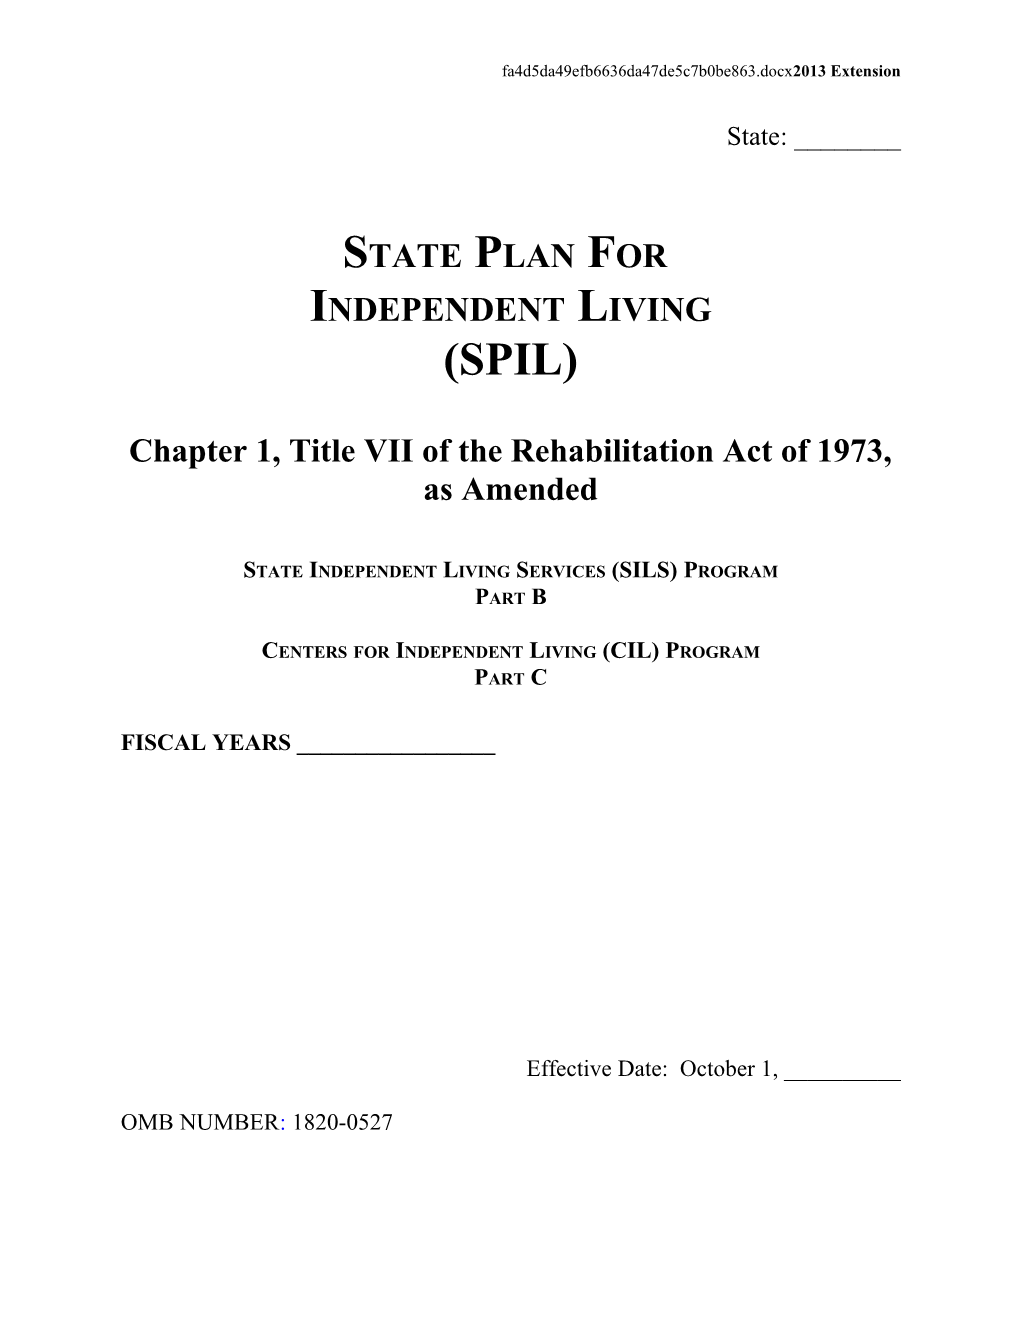 Chapter 1, Title VII of the Rehabilitation Act of 1973, As Amended